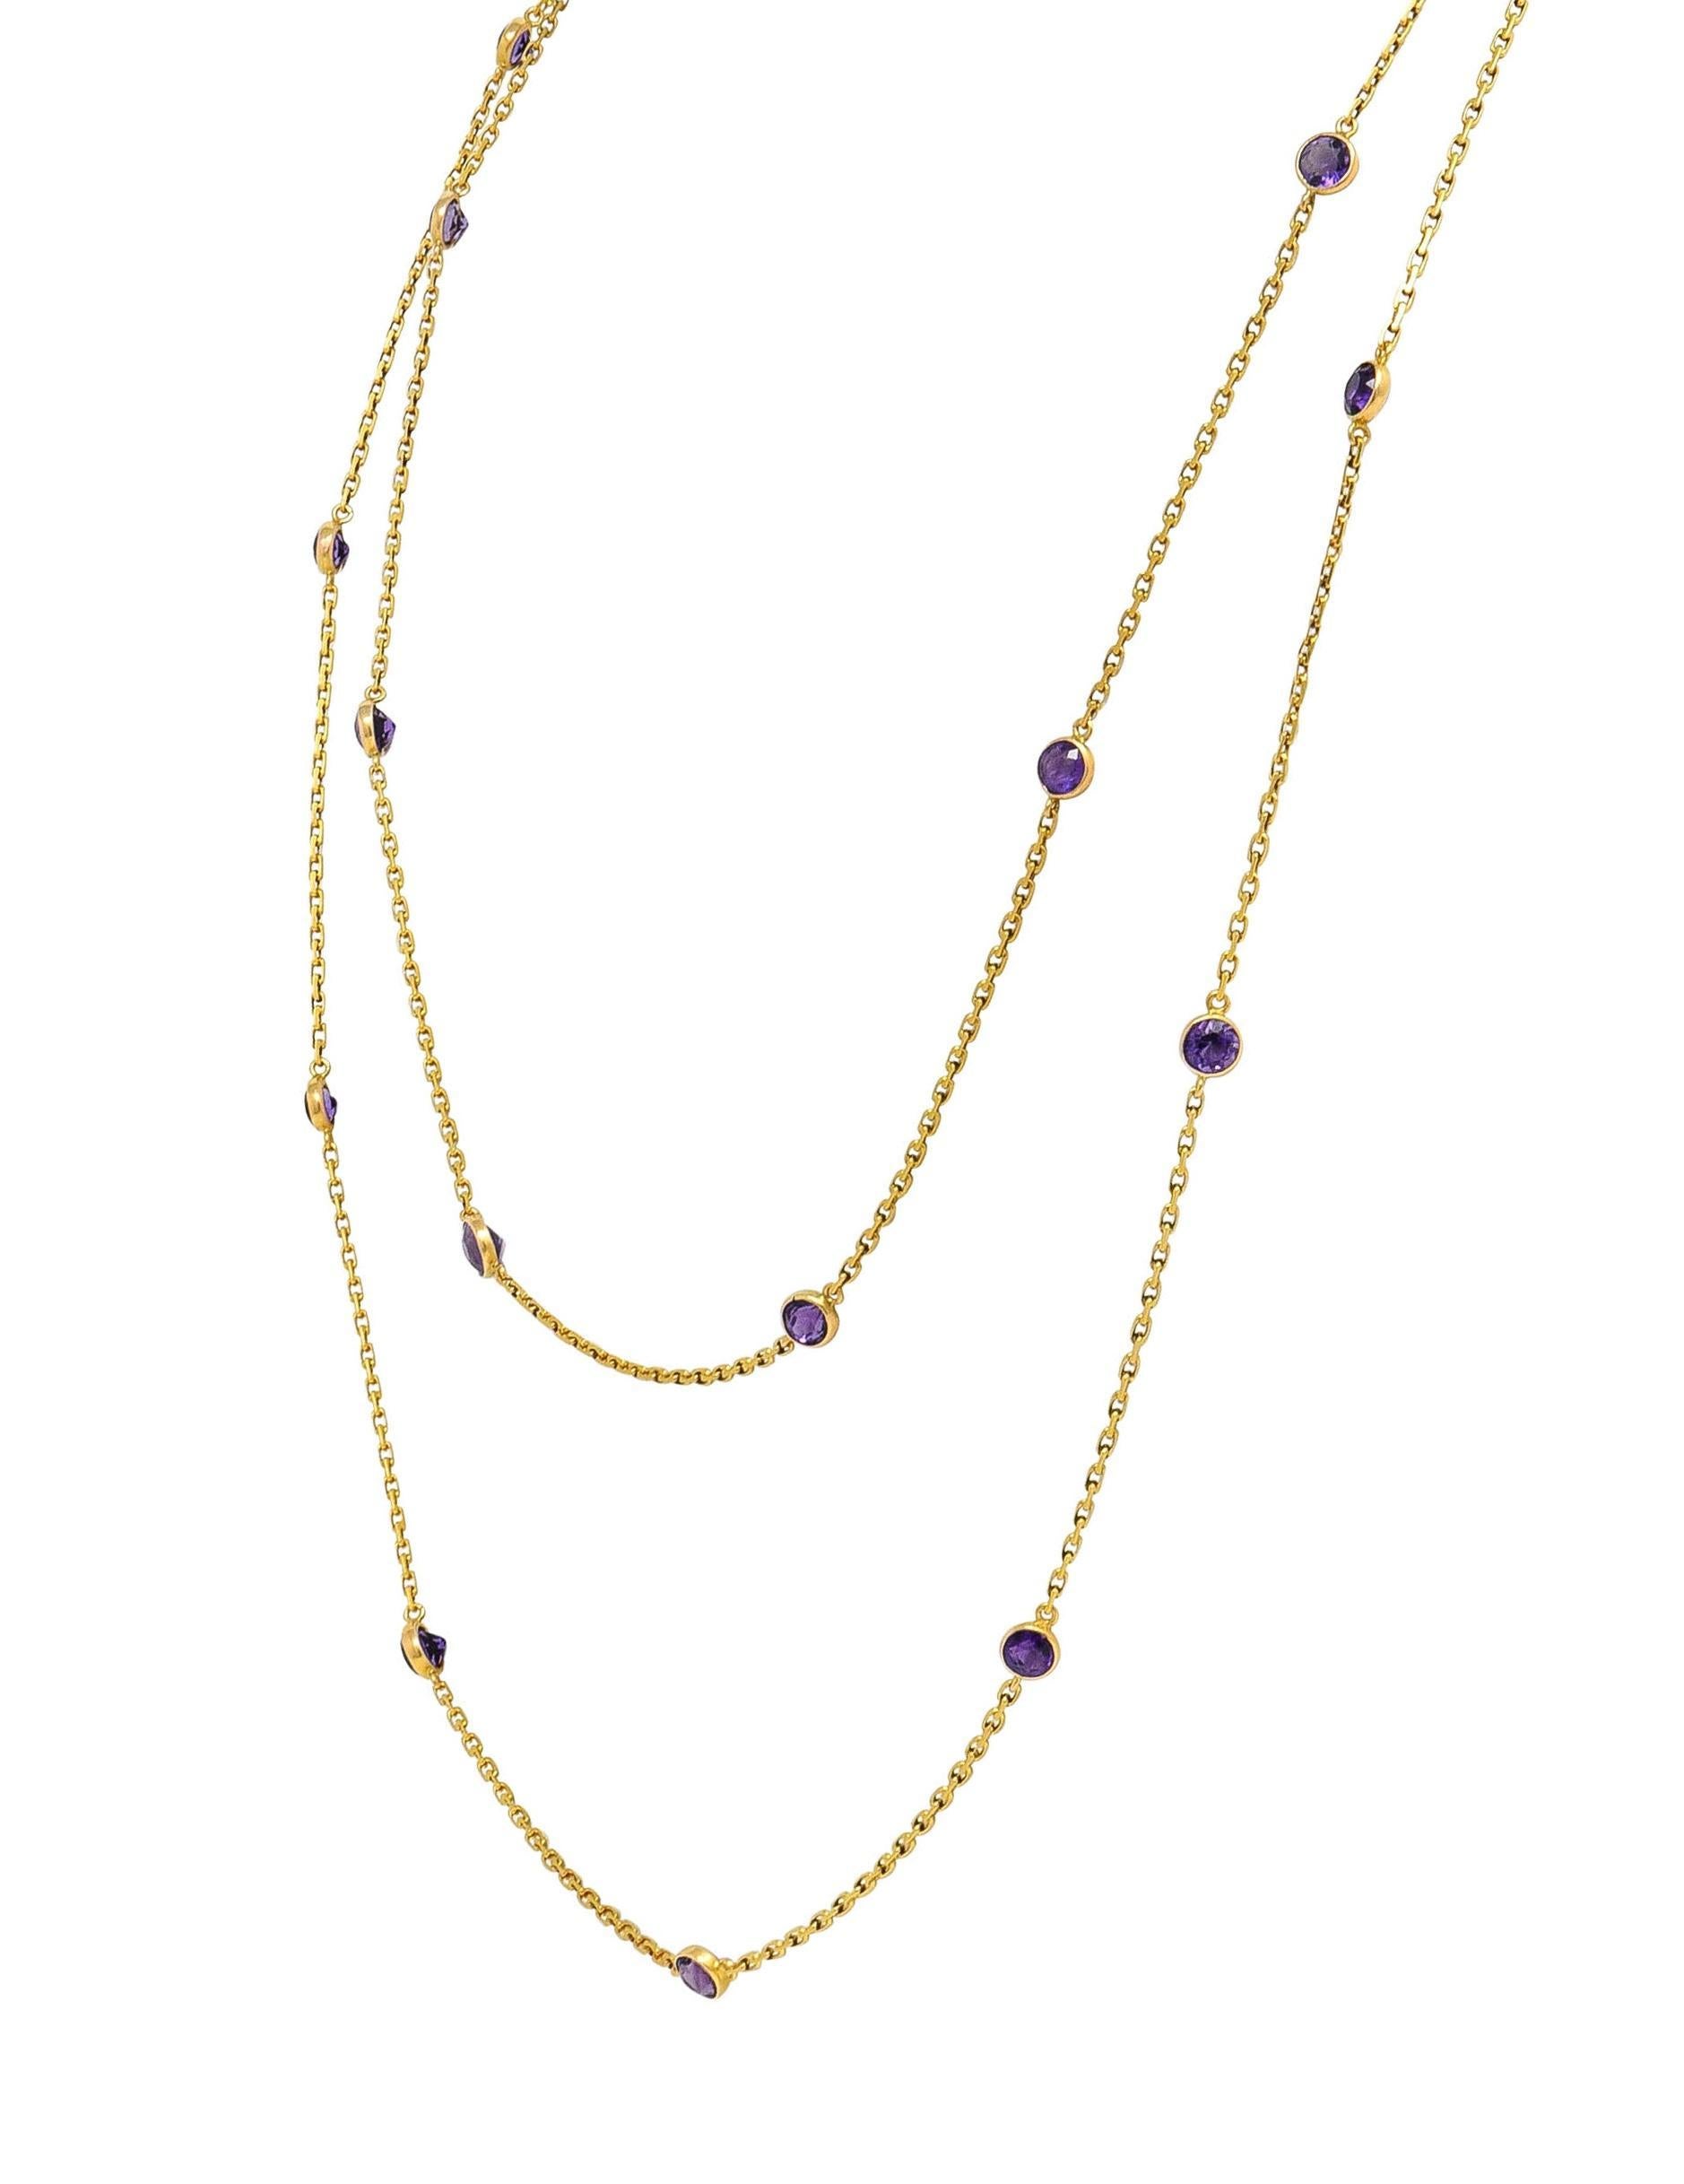 Victorian Amethyst 18K Yellow Gold 59 IN Long Antique Station Chain Necklace In Excellent Condition For Sale In Philadelphia, PA